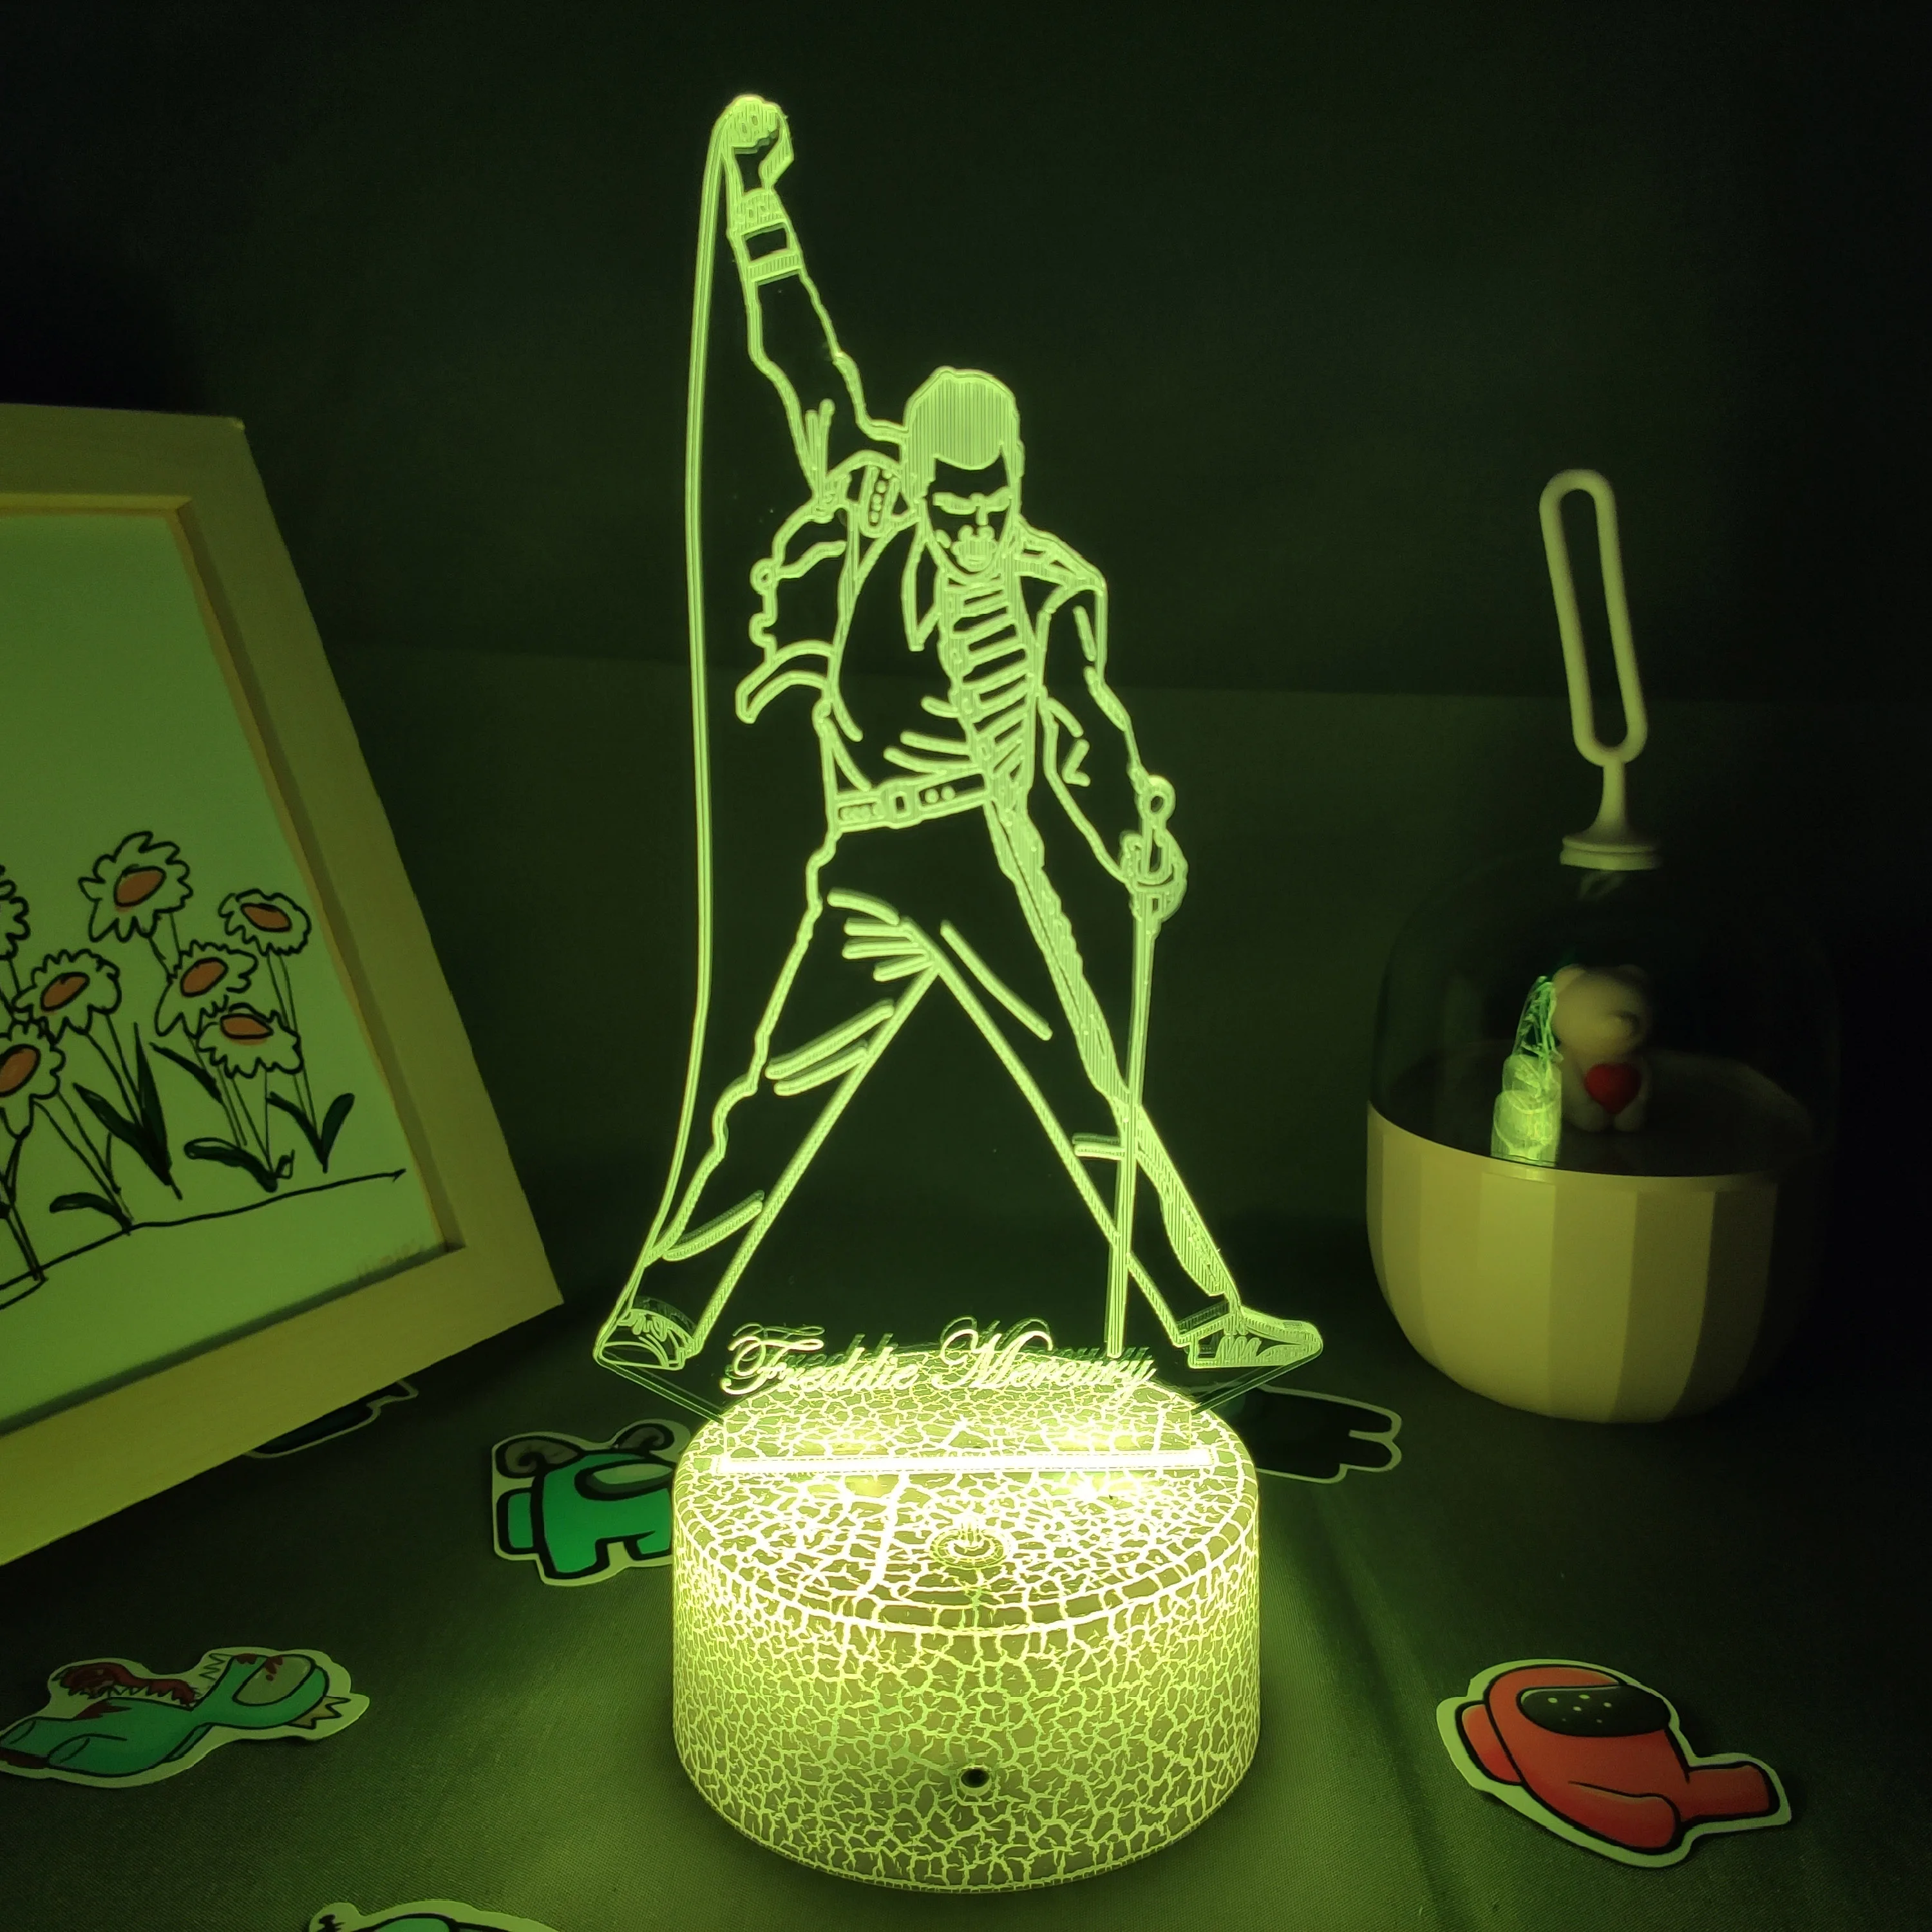 led night light 3D Figure Queen lead singer Freddie Mercury led illusion Night lights creative cool gift for friends child lava lamp Desk decor holiday nights of lights